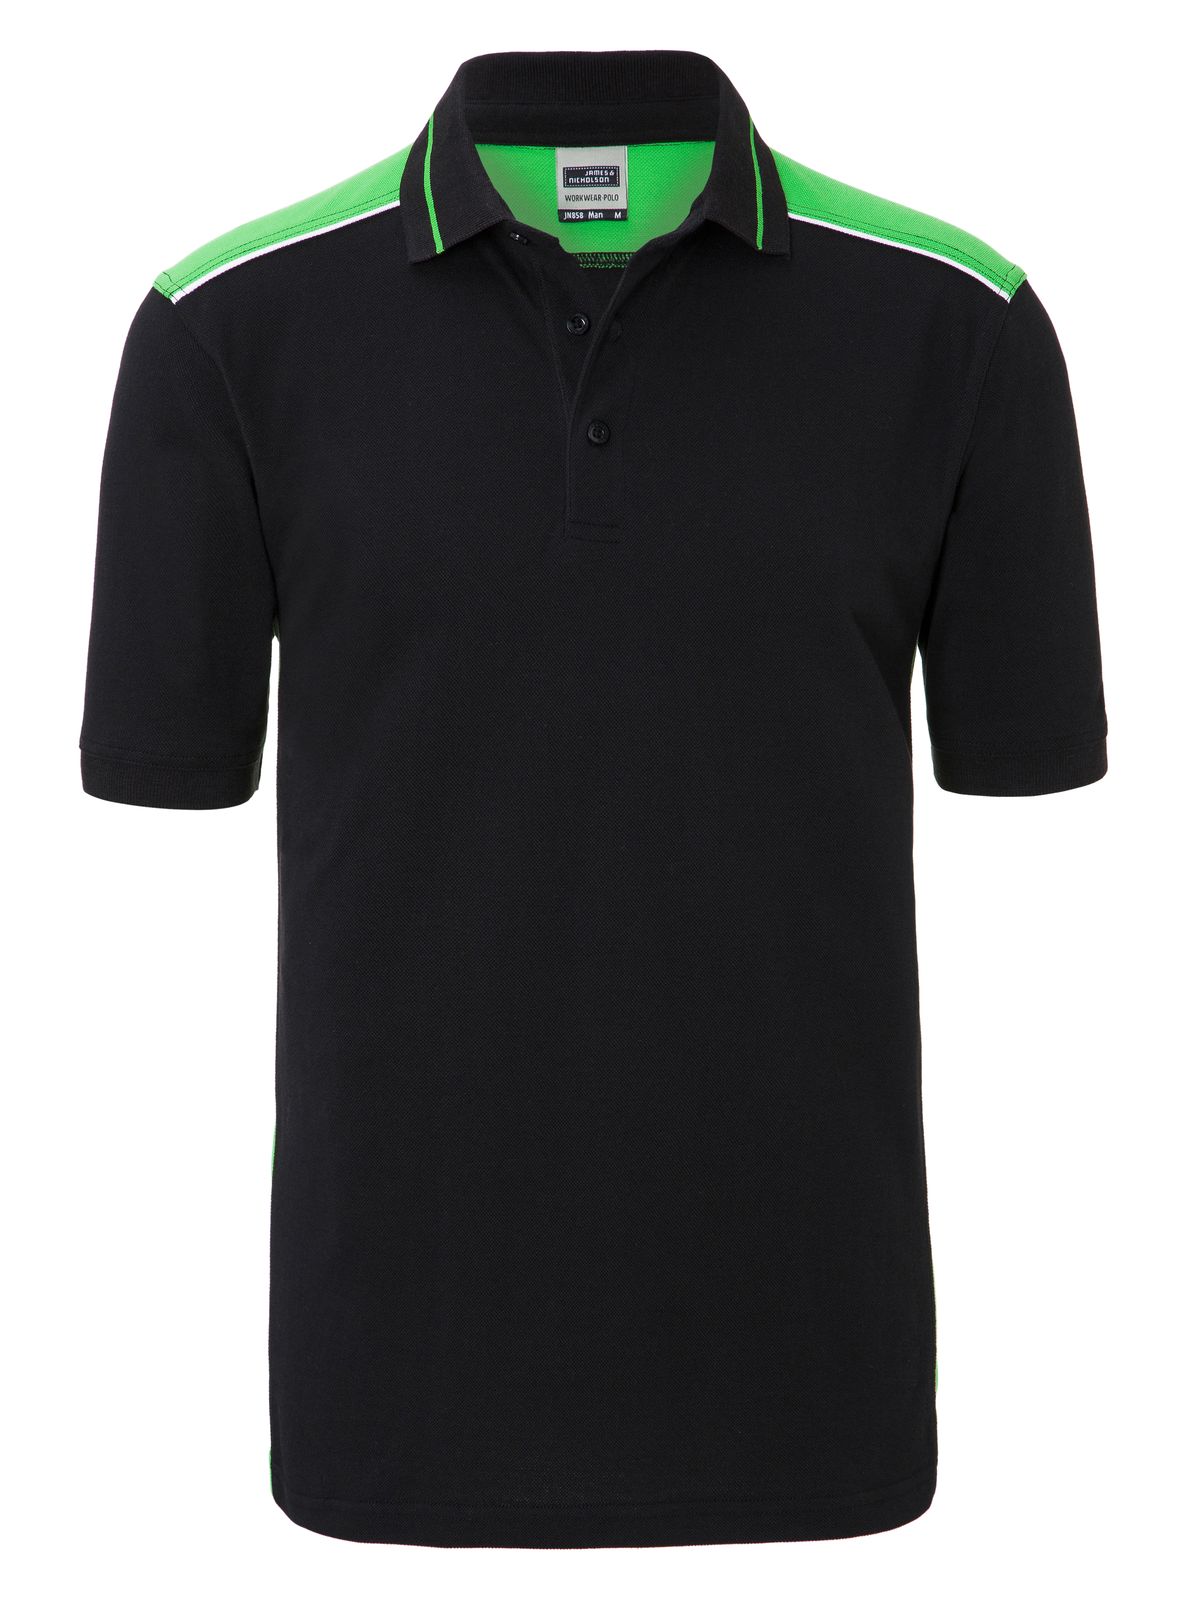 mens-workwear-polo-color-black-lime-green.webp